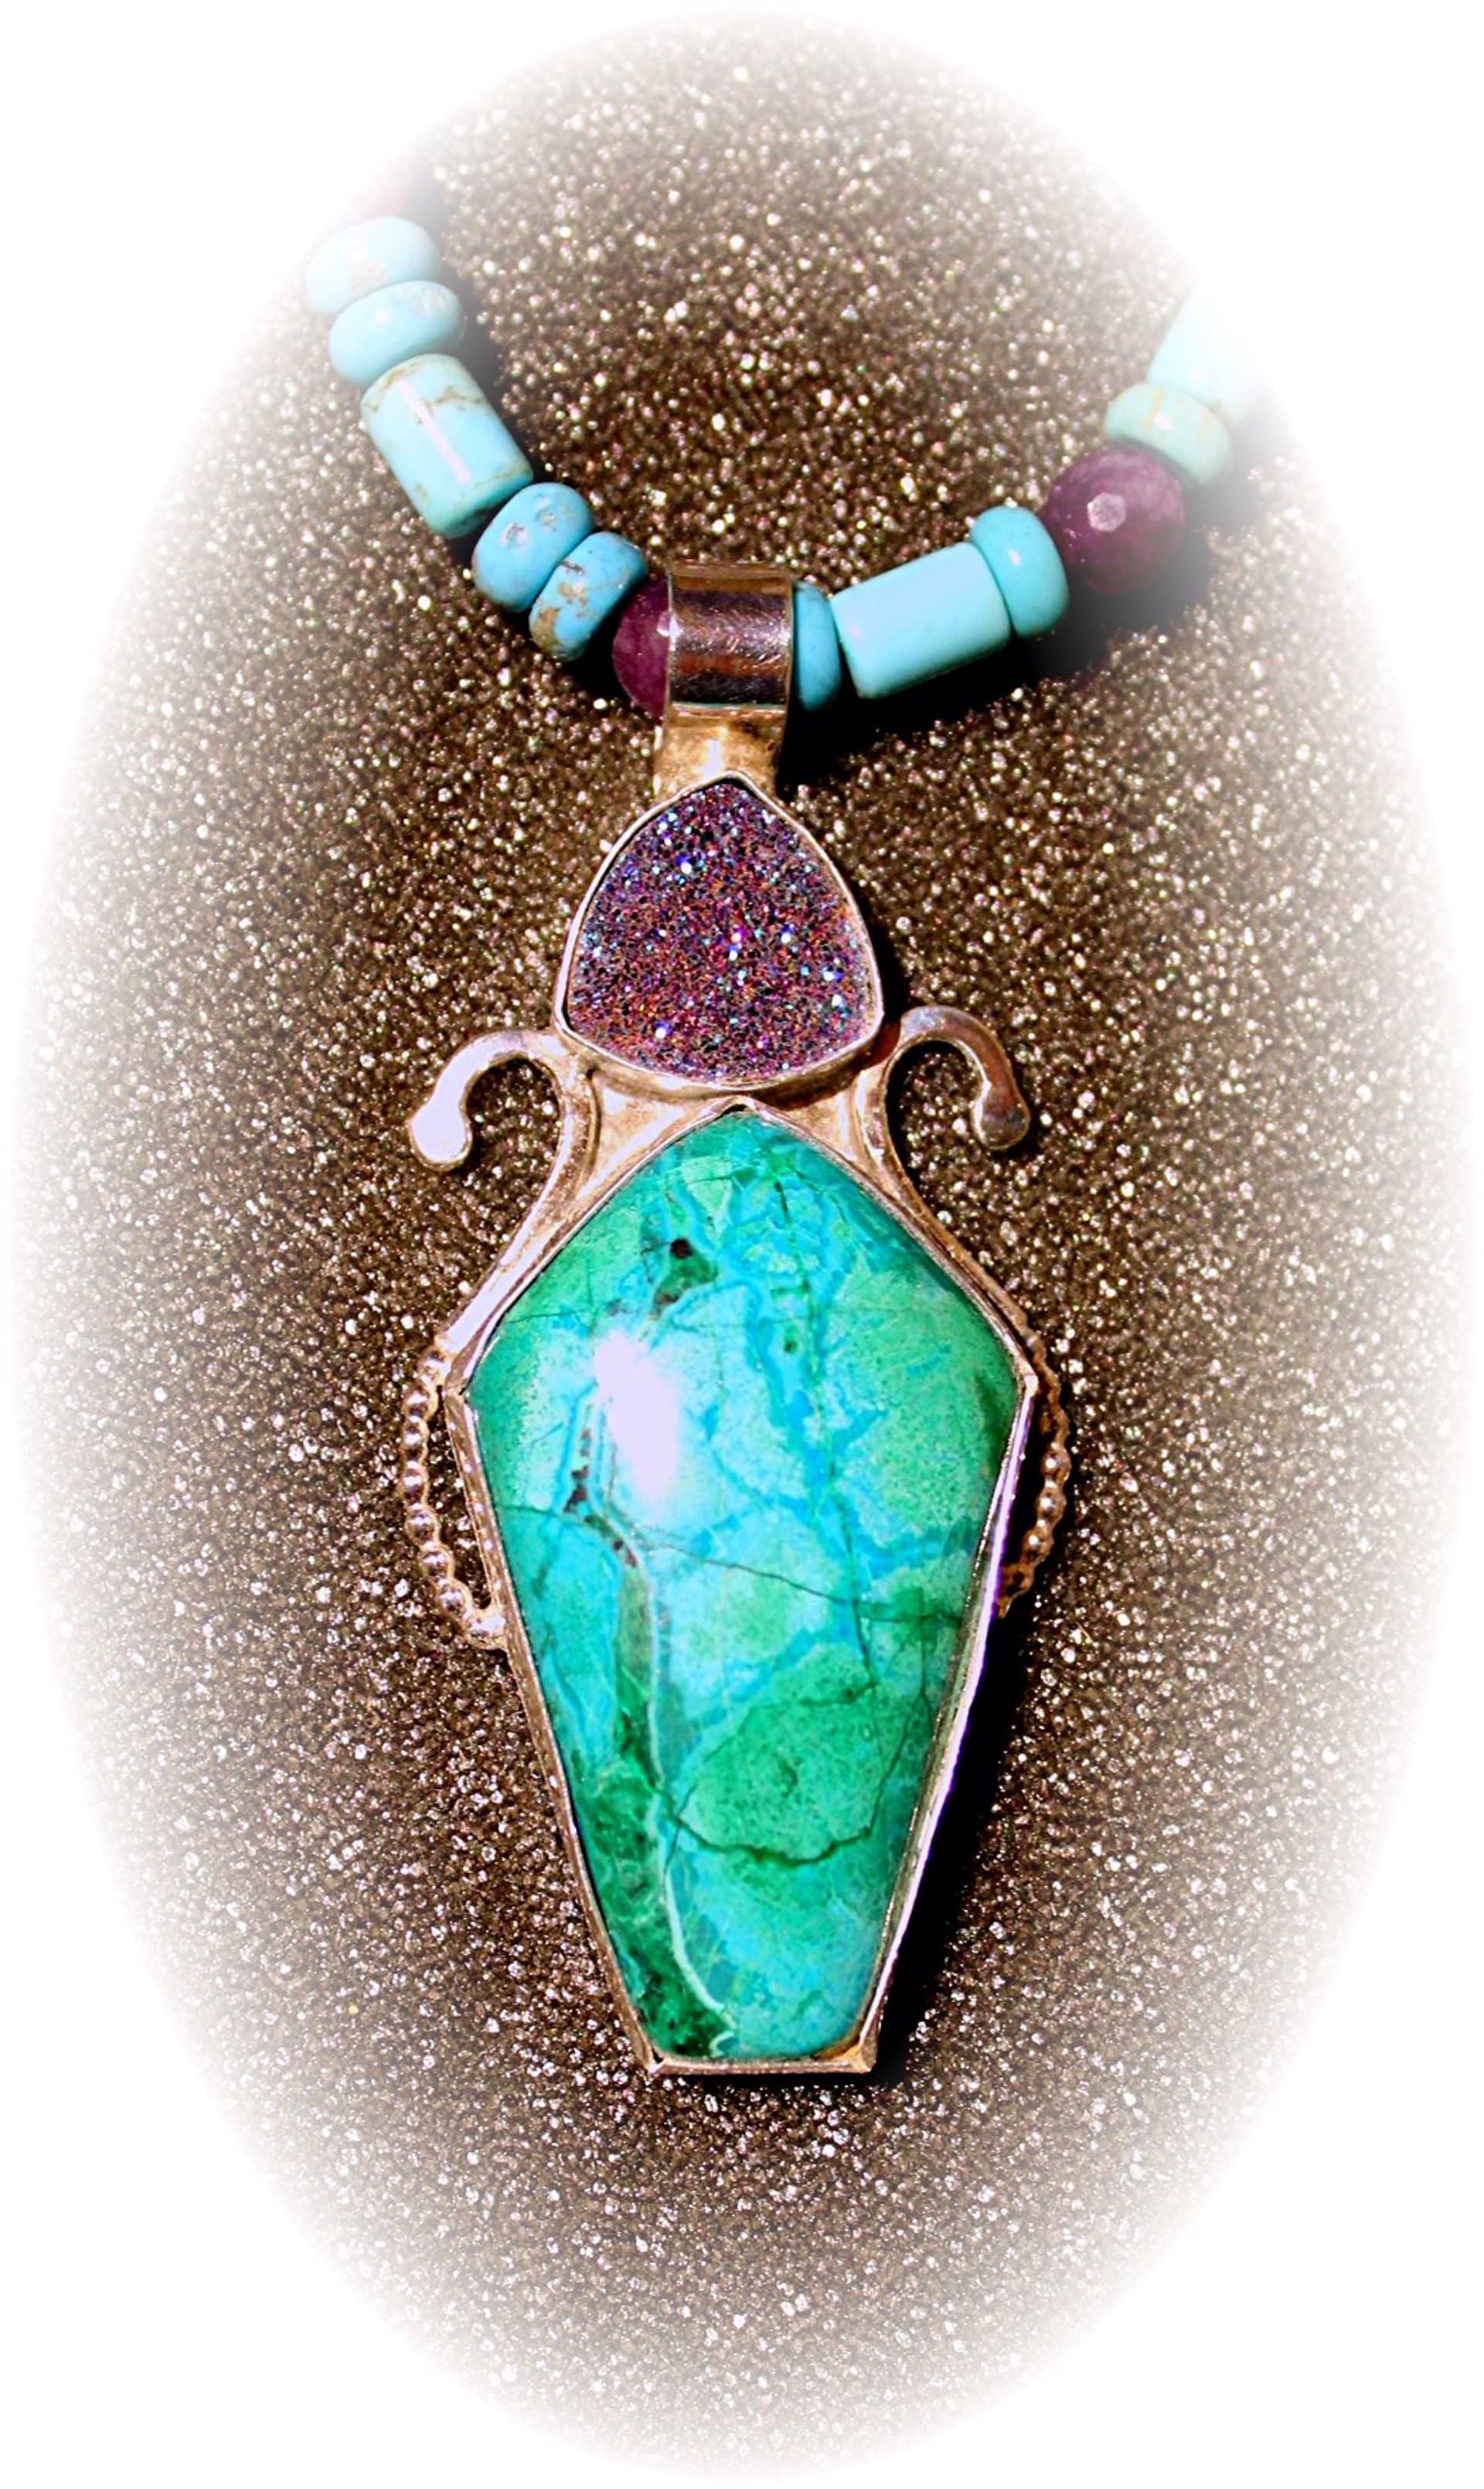 Chrysocolla+Druzy with turquoise and amethyst beads by Michael Redhawk